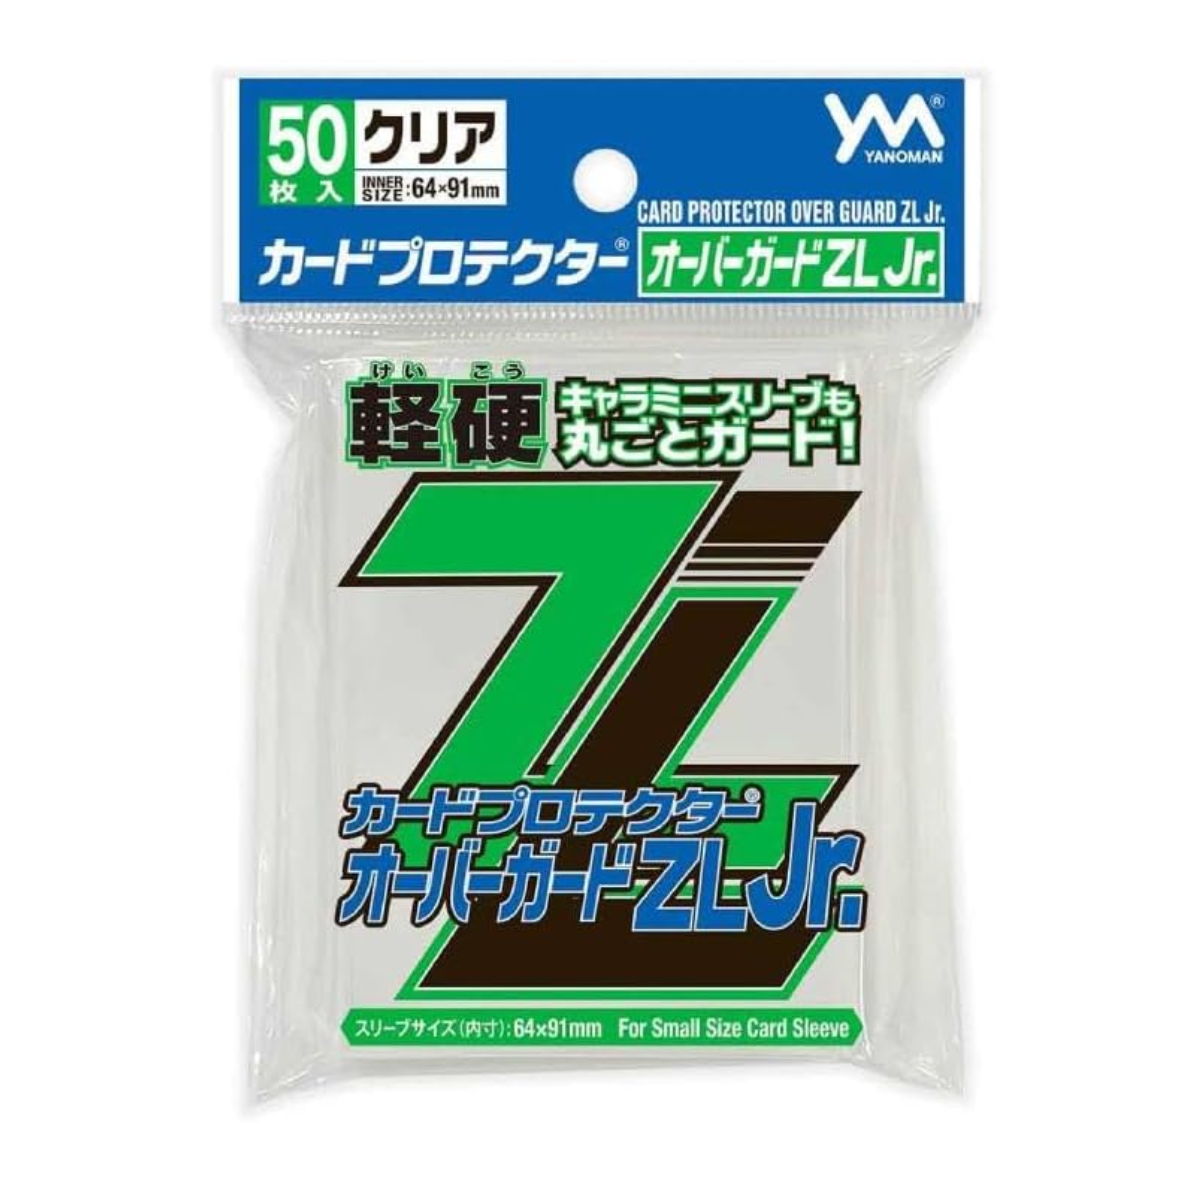 Yanoman Sleeve Card Protector Over Guard Z L Sleeve - Japanese Size-Yanoman-Ace Cards &amp; Collectibles